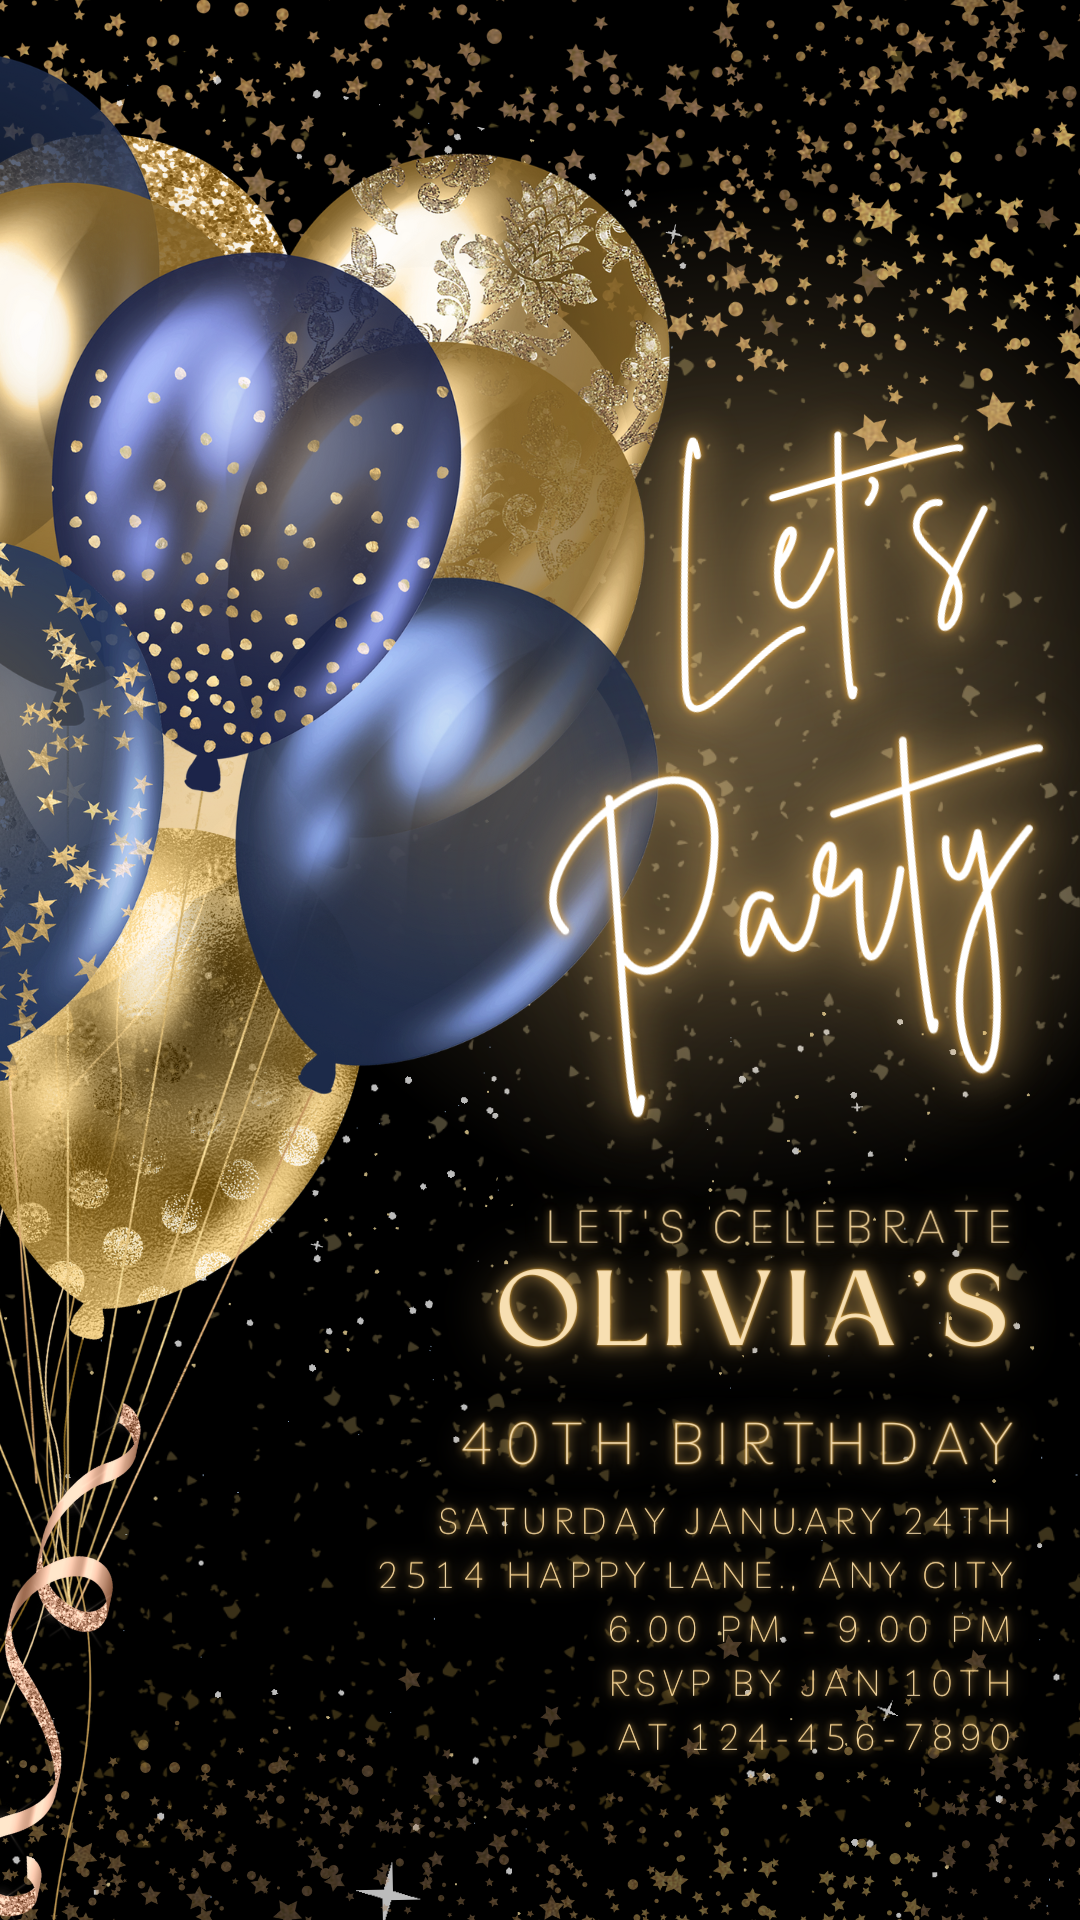 Animated Let's Party Invite for any Event Celebration, Editable Video Template, Birthday invitation for any Age | Blue & Gold E-vite